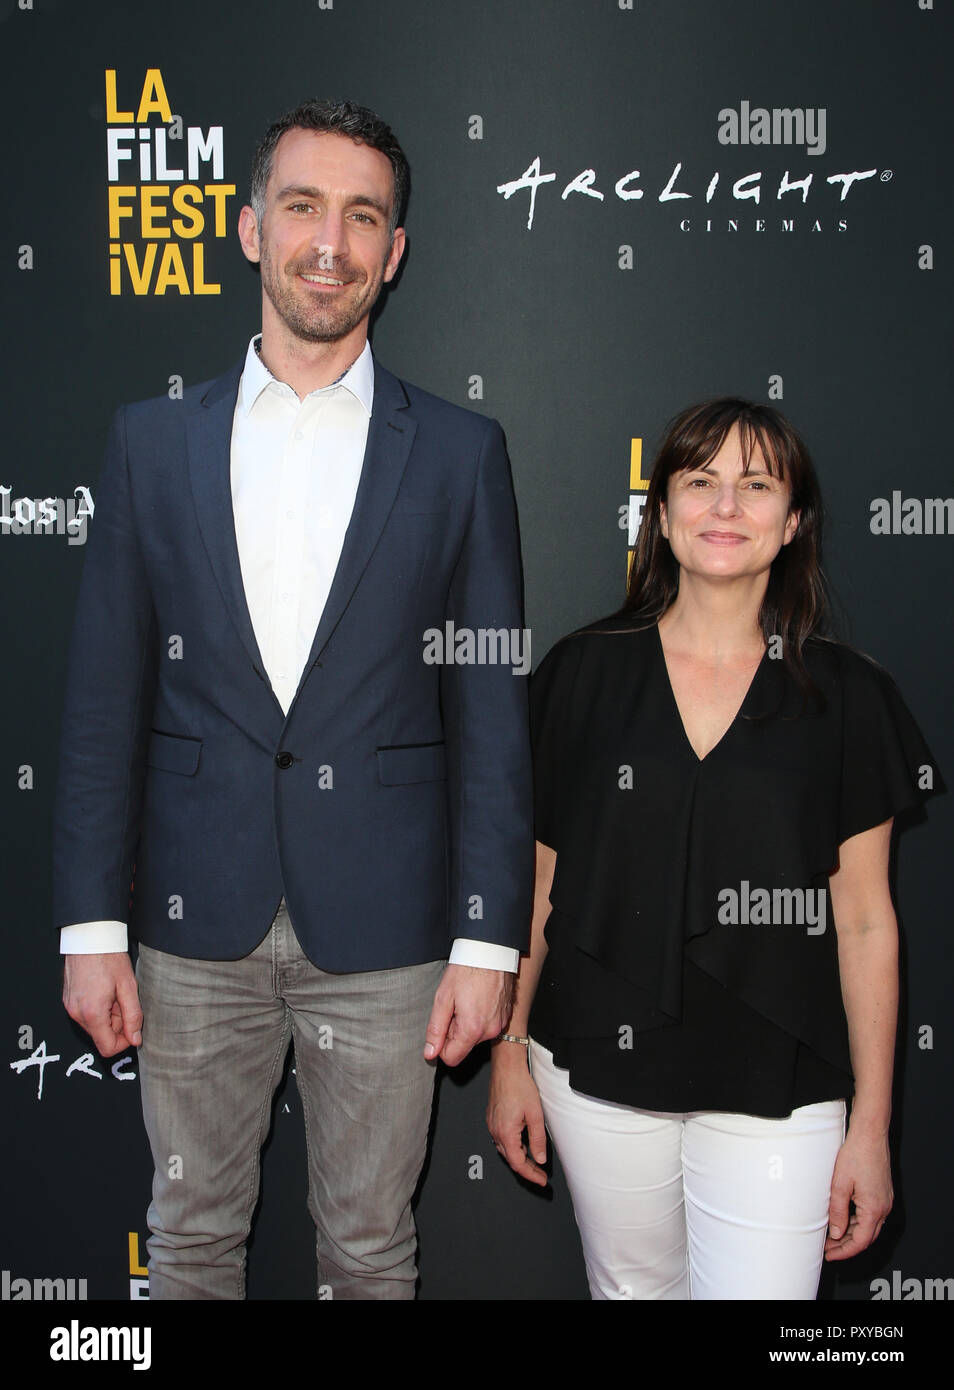 2018 LA Film Festival - 'We Have Always Lived in the Castle' - Screening  Featuring: Nada Cirjanic, Matt Stevens Where: Culver City, California, United States When: 22 Sep 2018 Credit: FayesVision/WENN.com Stock Photo